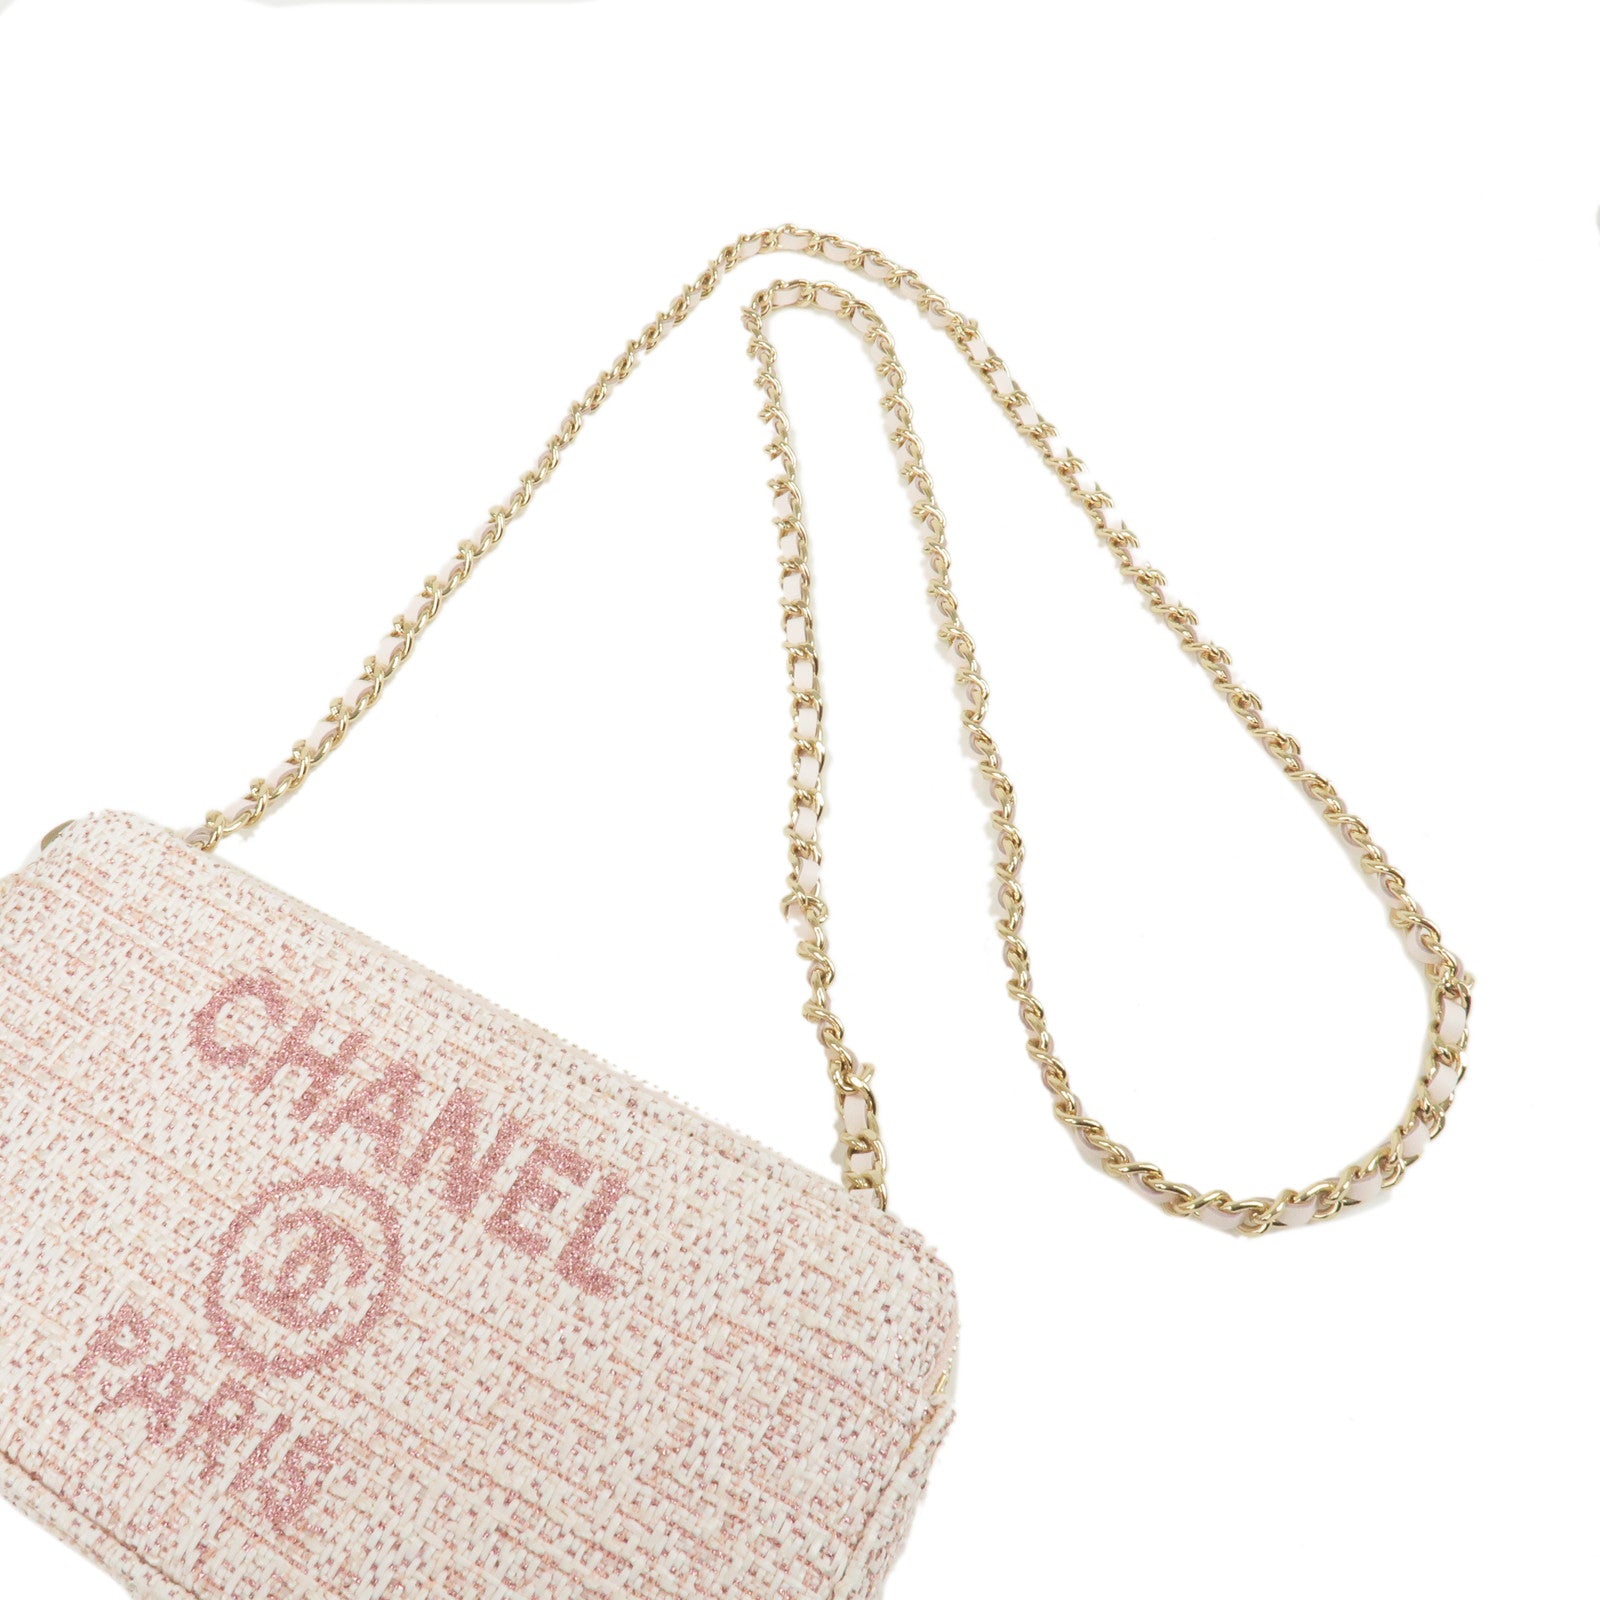 Deauville - Leather - WOC - ep_vintage luxury Store - Tweed - Chain - Pink  - Wallet - A81978 – dct - CHANEL - Chanel Pre-Owned 1994 CC terry-cloth  backpack